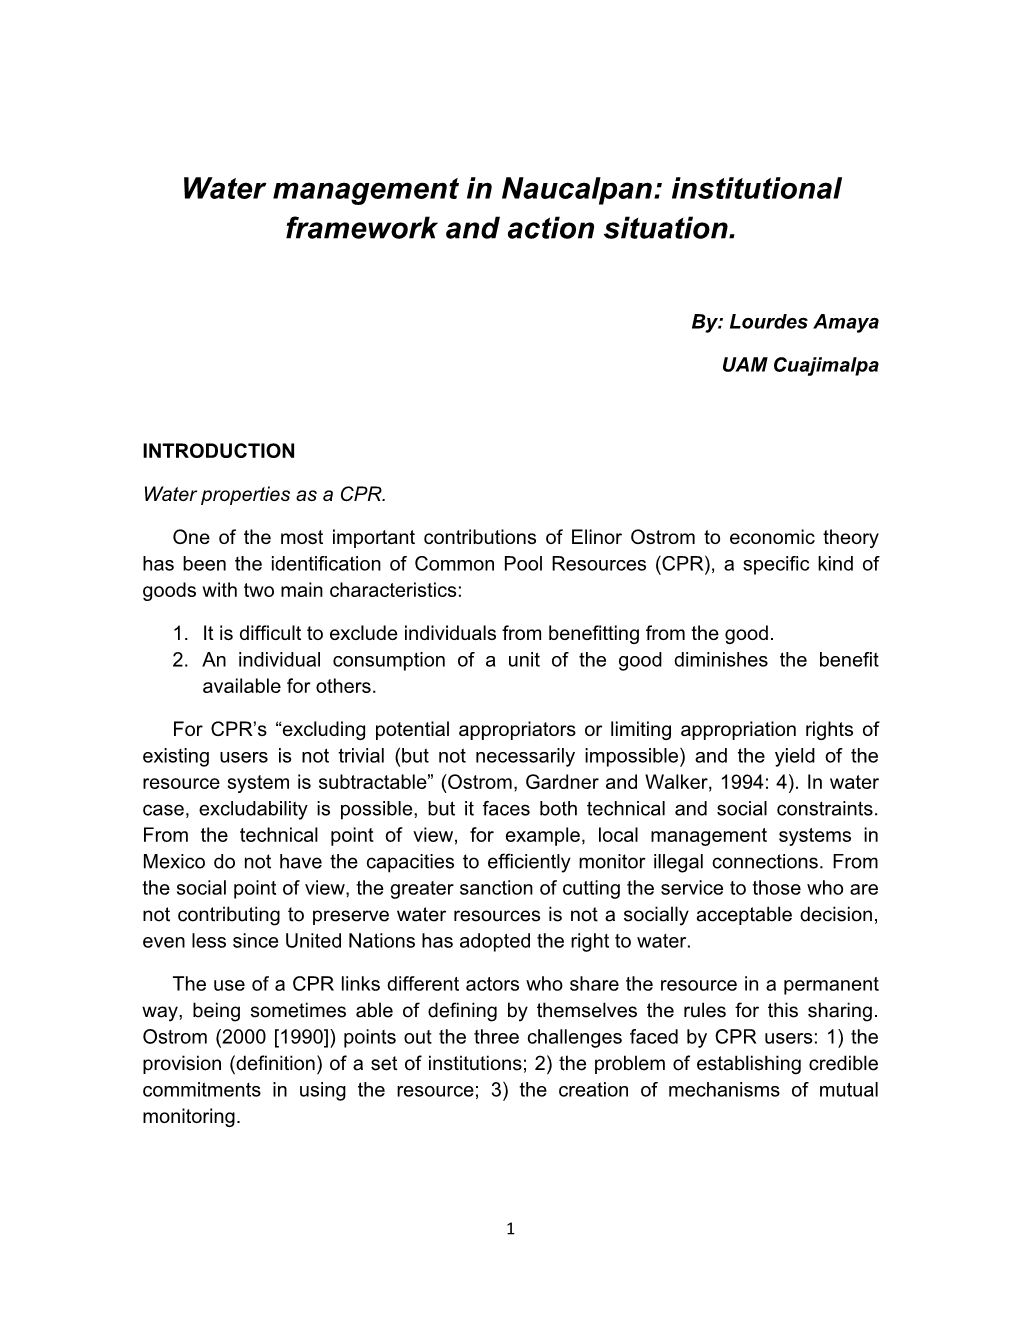 Water Management in Naucalpan: Institutional Framework and Action Situation